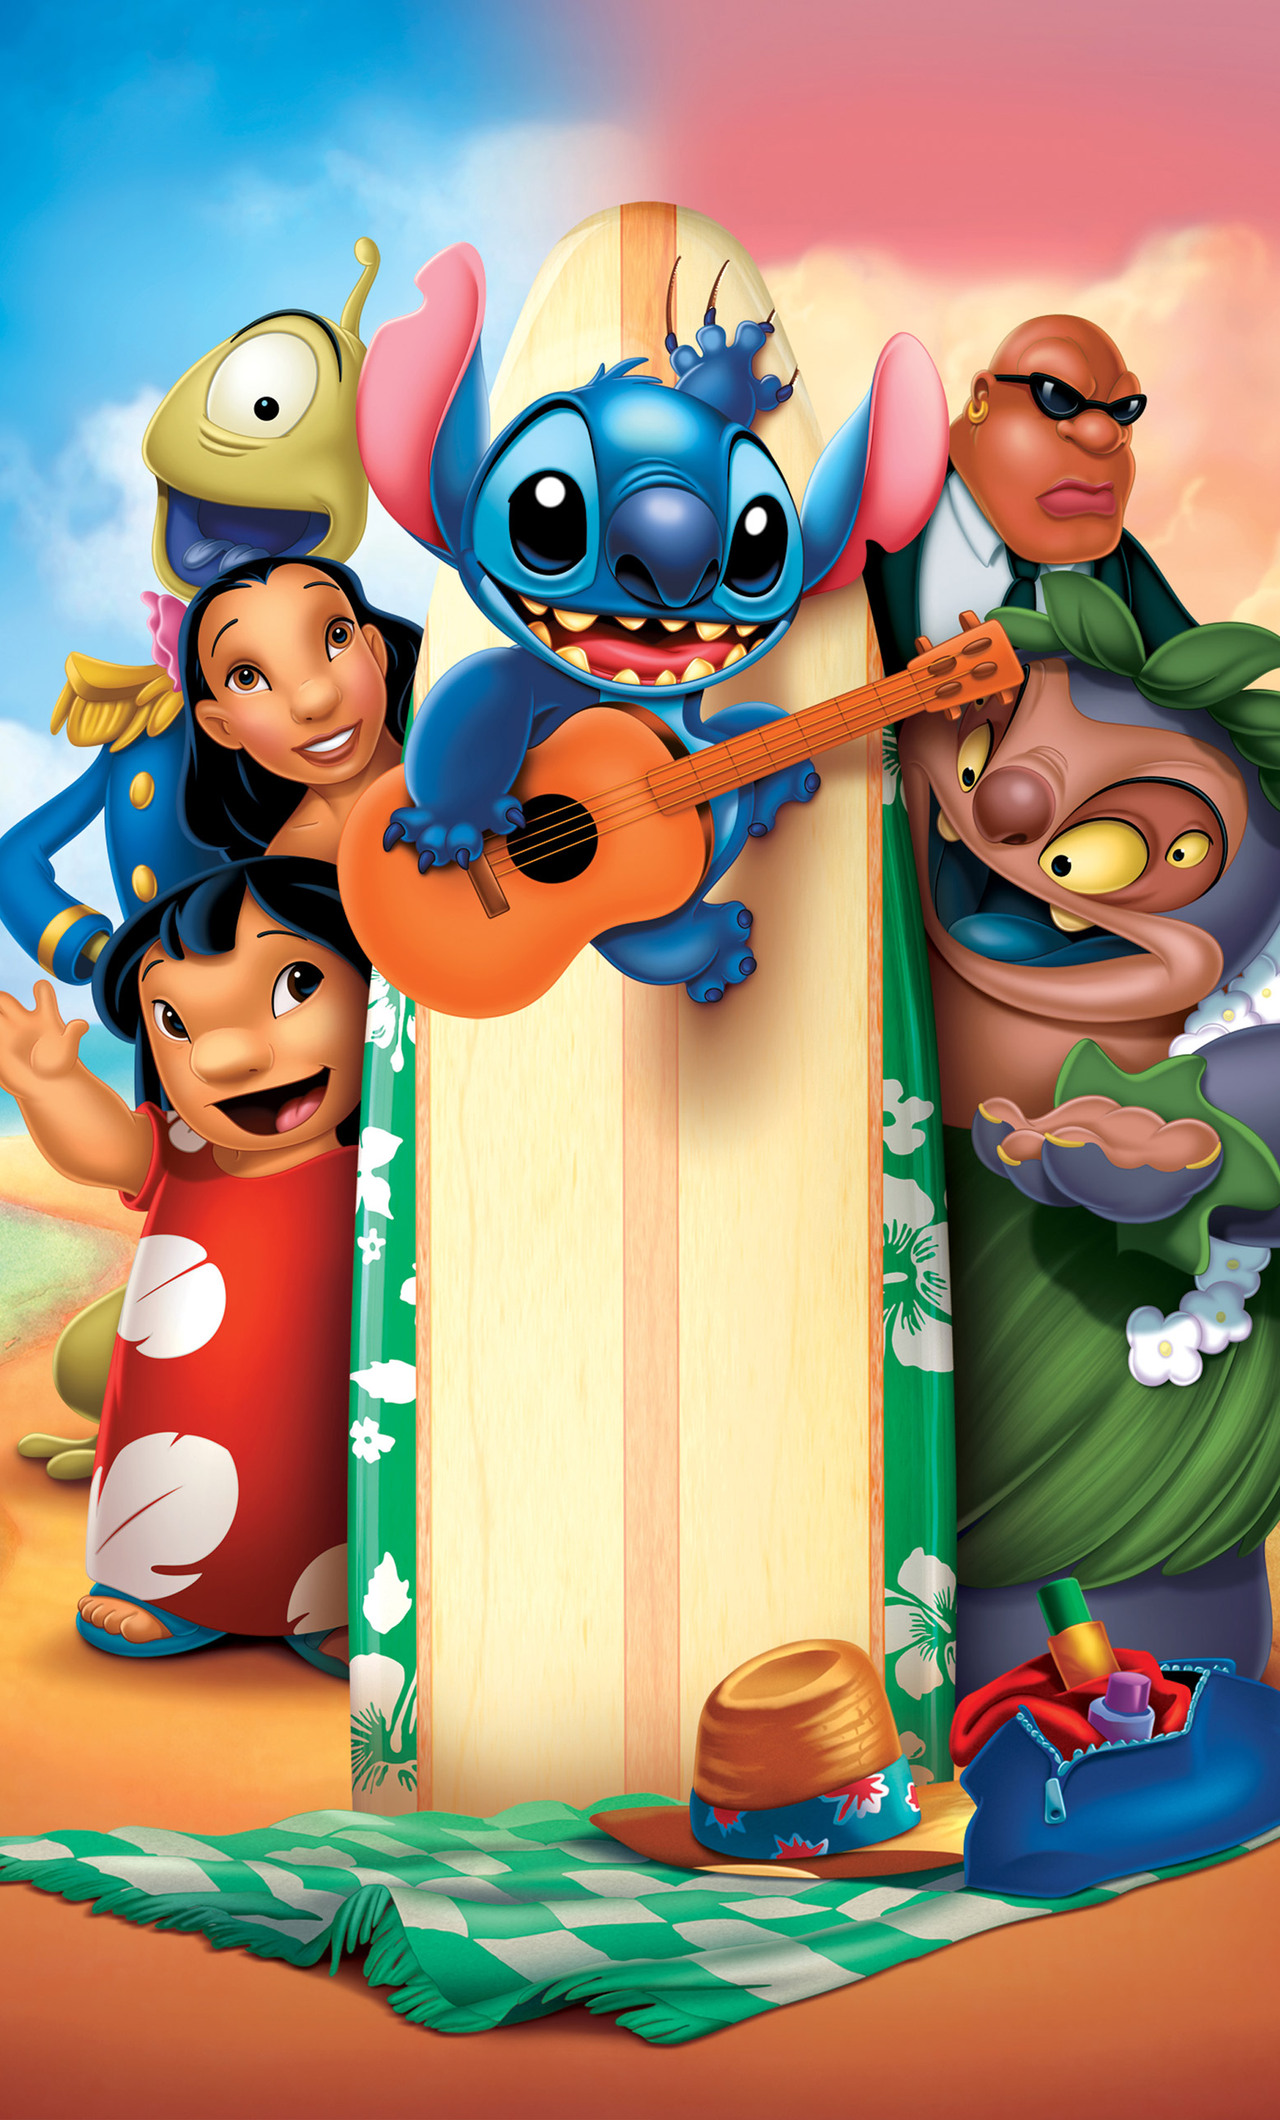 1280x2120 Lilo And Stitch Animated Movie Iphone 6 Hd 4k Wallpapers Images Backgrounds Photos